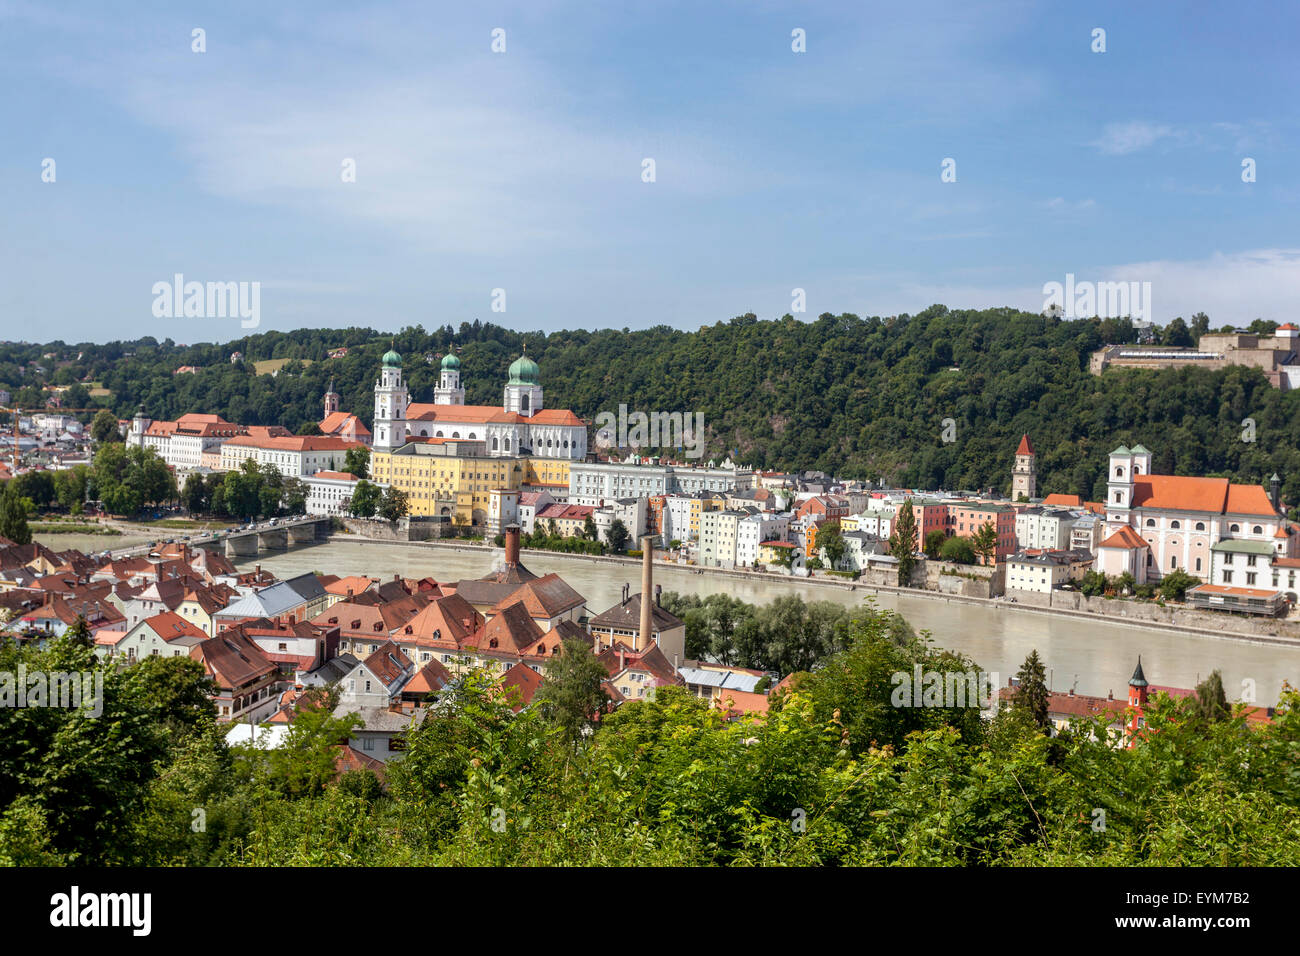 Passau Old Town Aerial view, River Inn, St. Stephan's Cathedral, Passau, Lower Bavaria, Germany, Europe Stock Photo